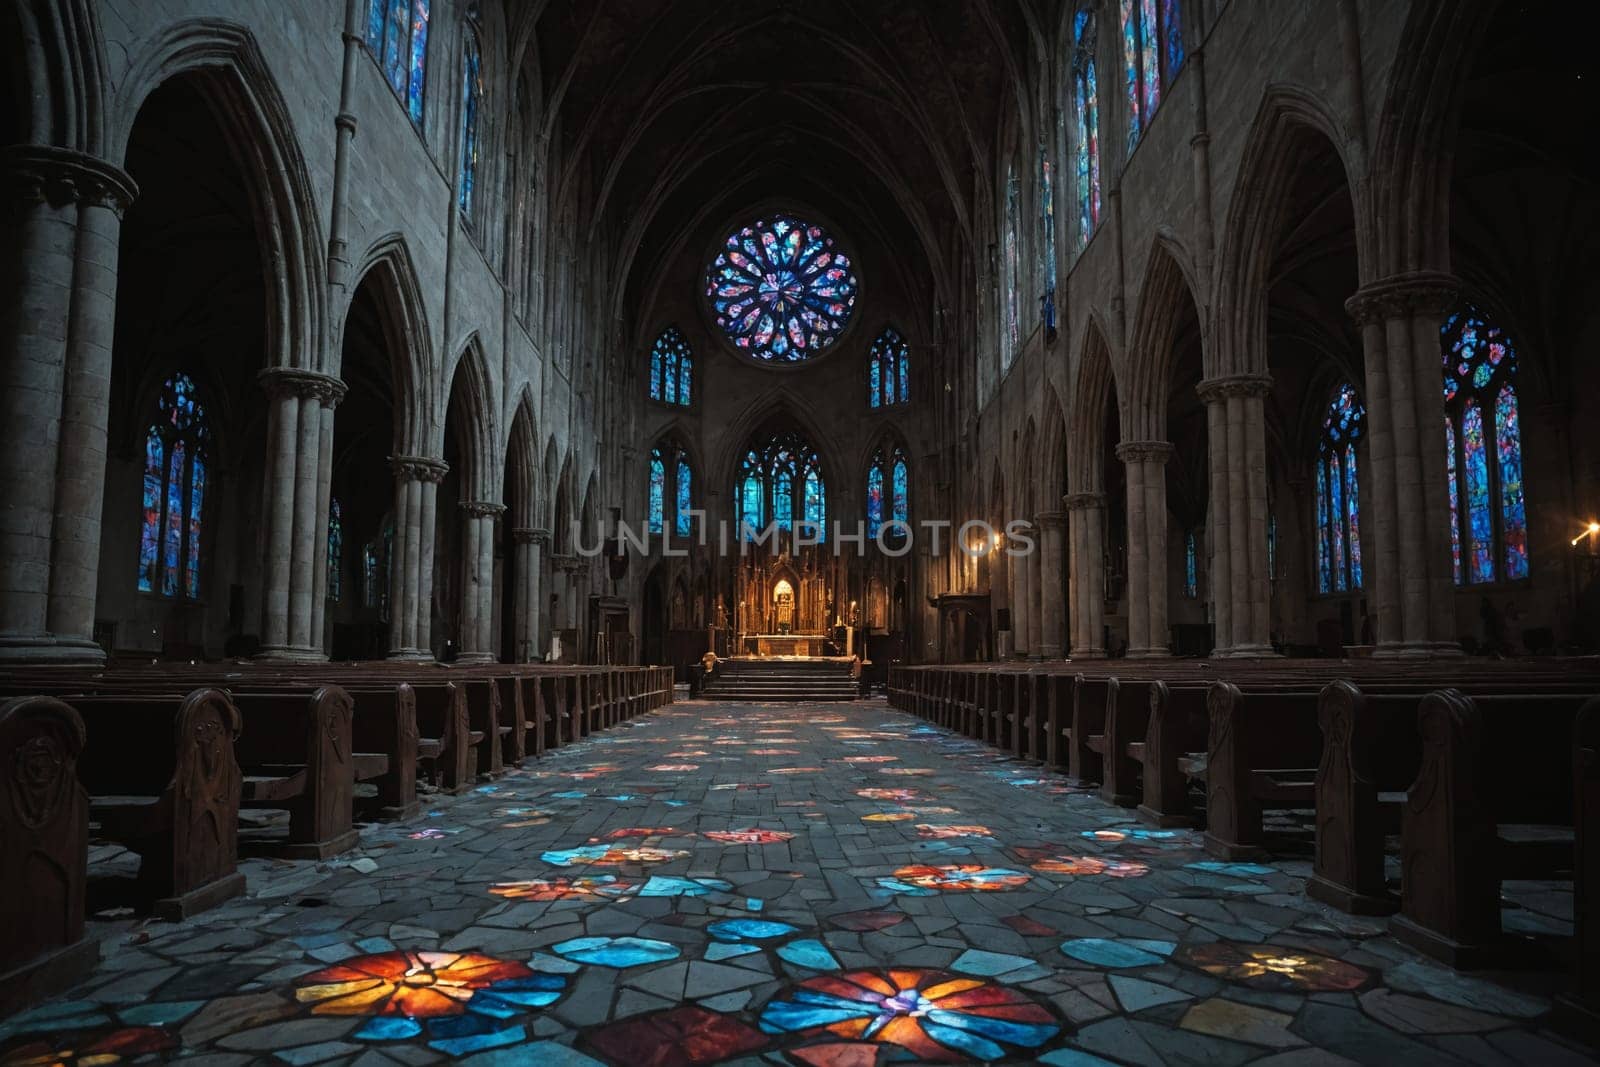 Stained Glass and Candles Illuminating Church Ambiance by Andre1ns